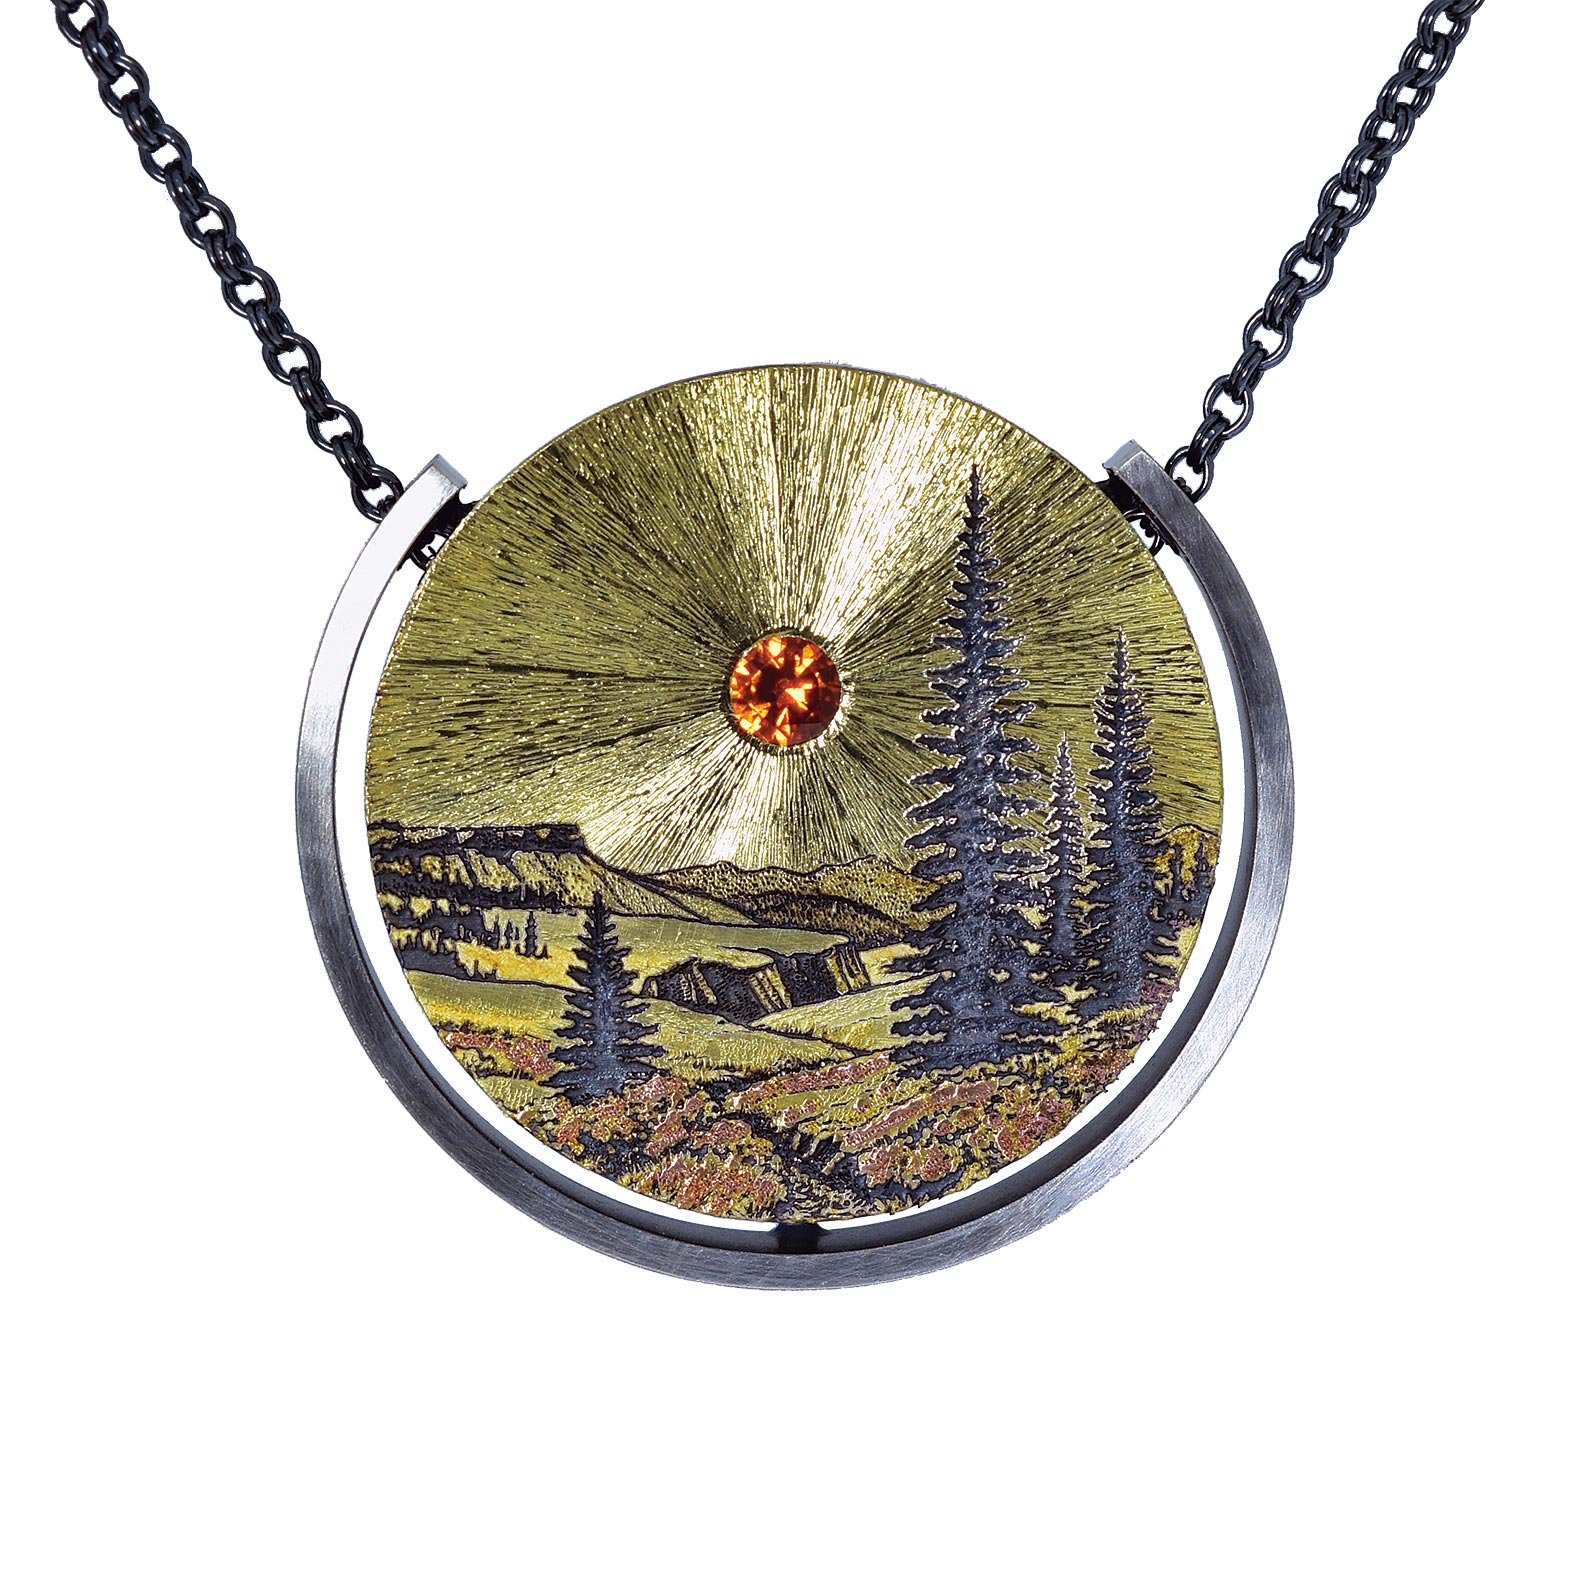  VIEW INSPIRED BY SOUTHERN UTAH PENDANT of eighteen karat gold sheet on sterling silver with fourteen karat rose and yellow gold, 3.7 millimeter Namibian spessartite garnet; fused, carved, engraved, and textured, 3.0 x 3.3 x 0.5 centimeters, 2023. 